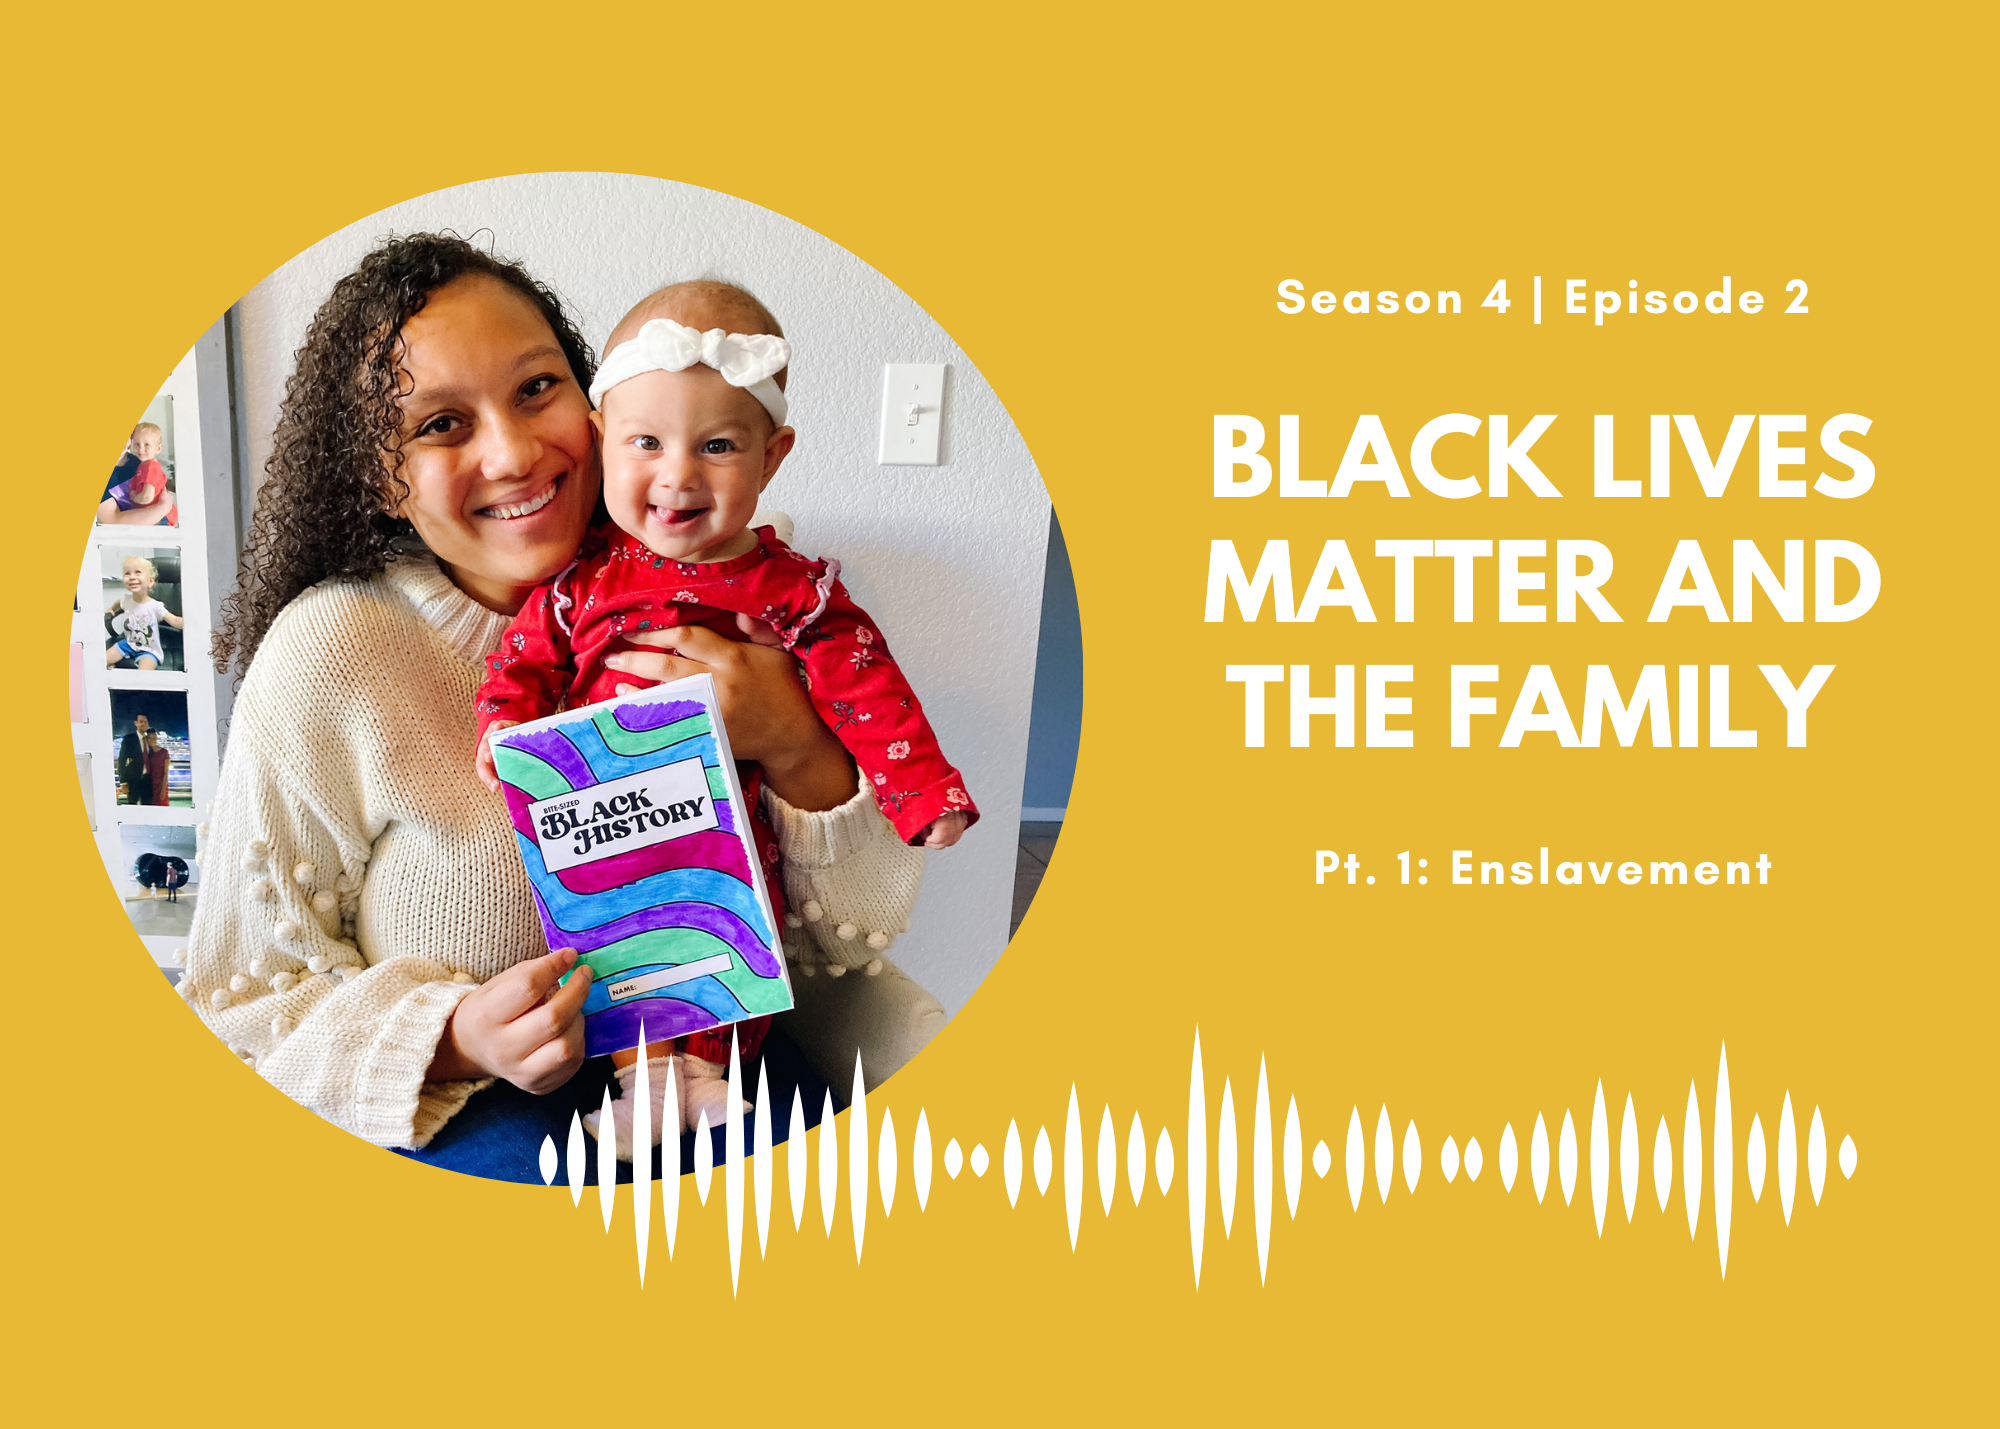 Black Lives Matter and the Family, Part 1: Enslavement